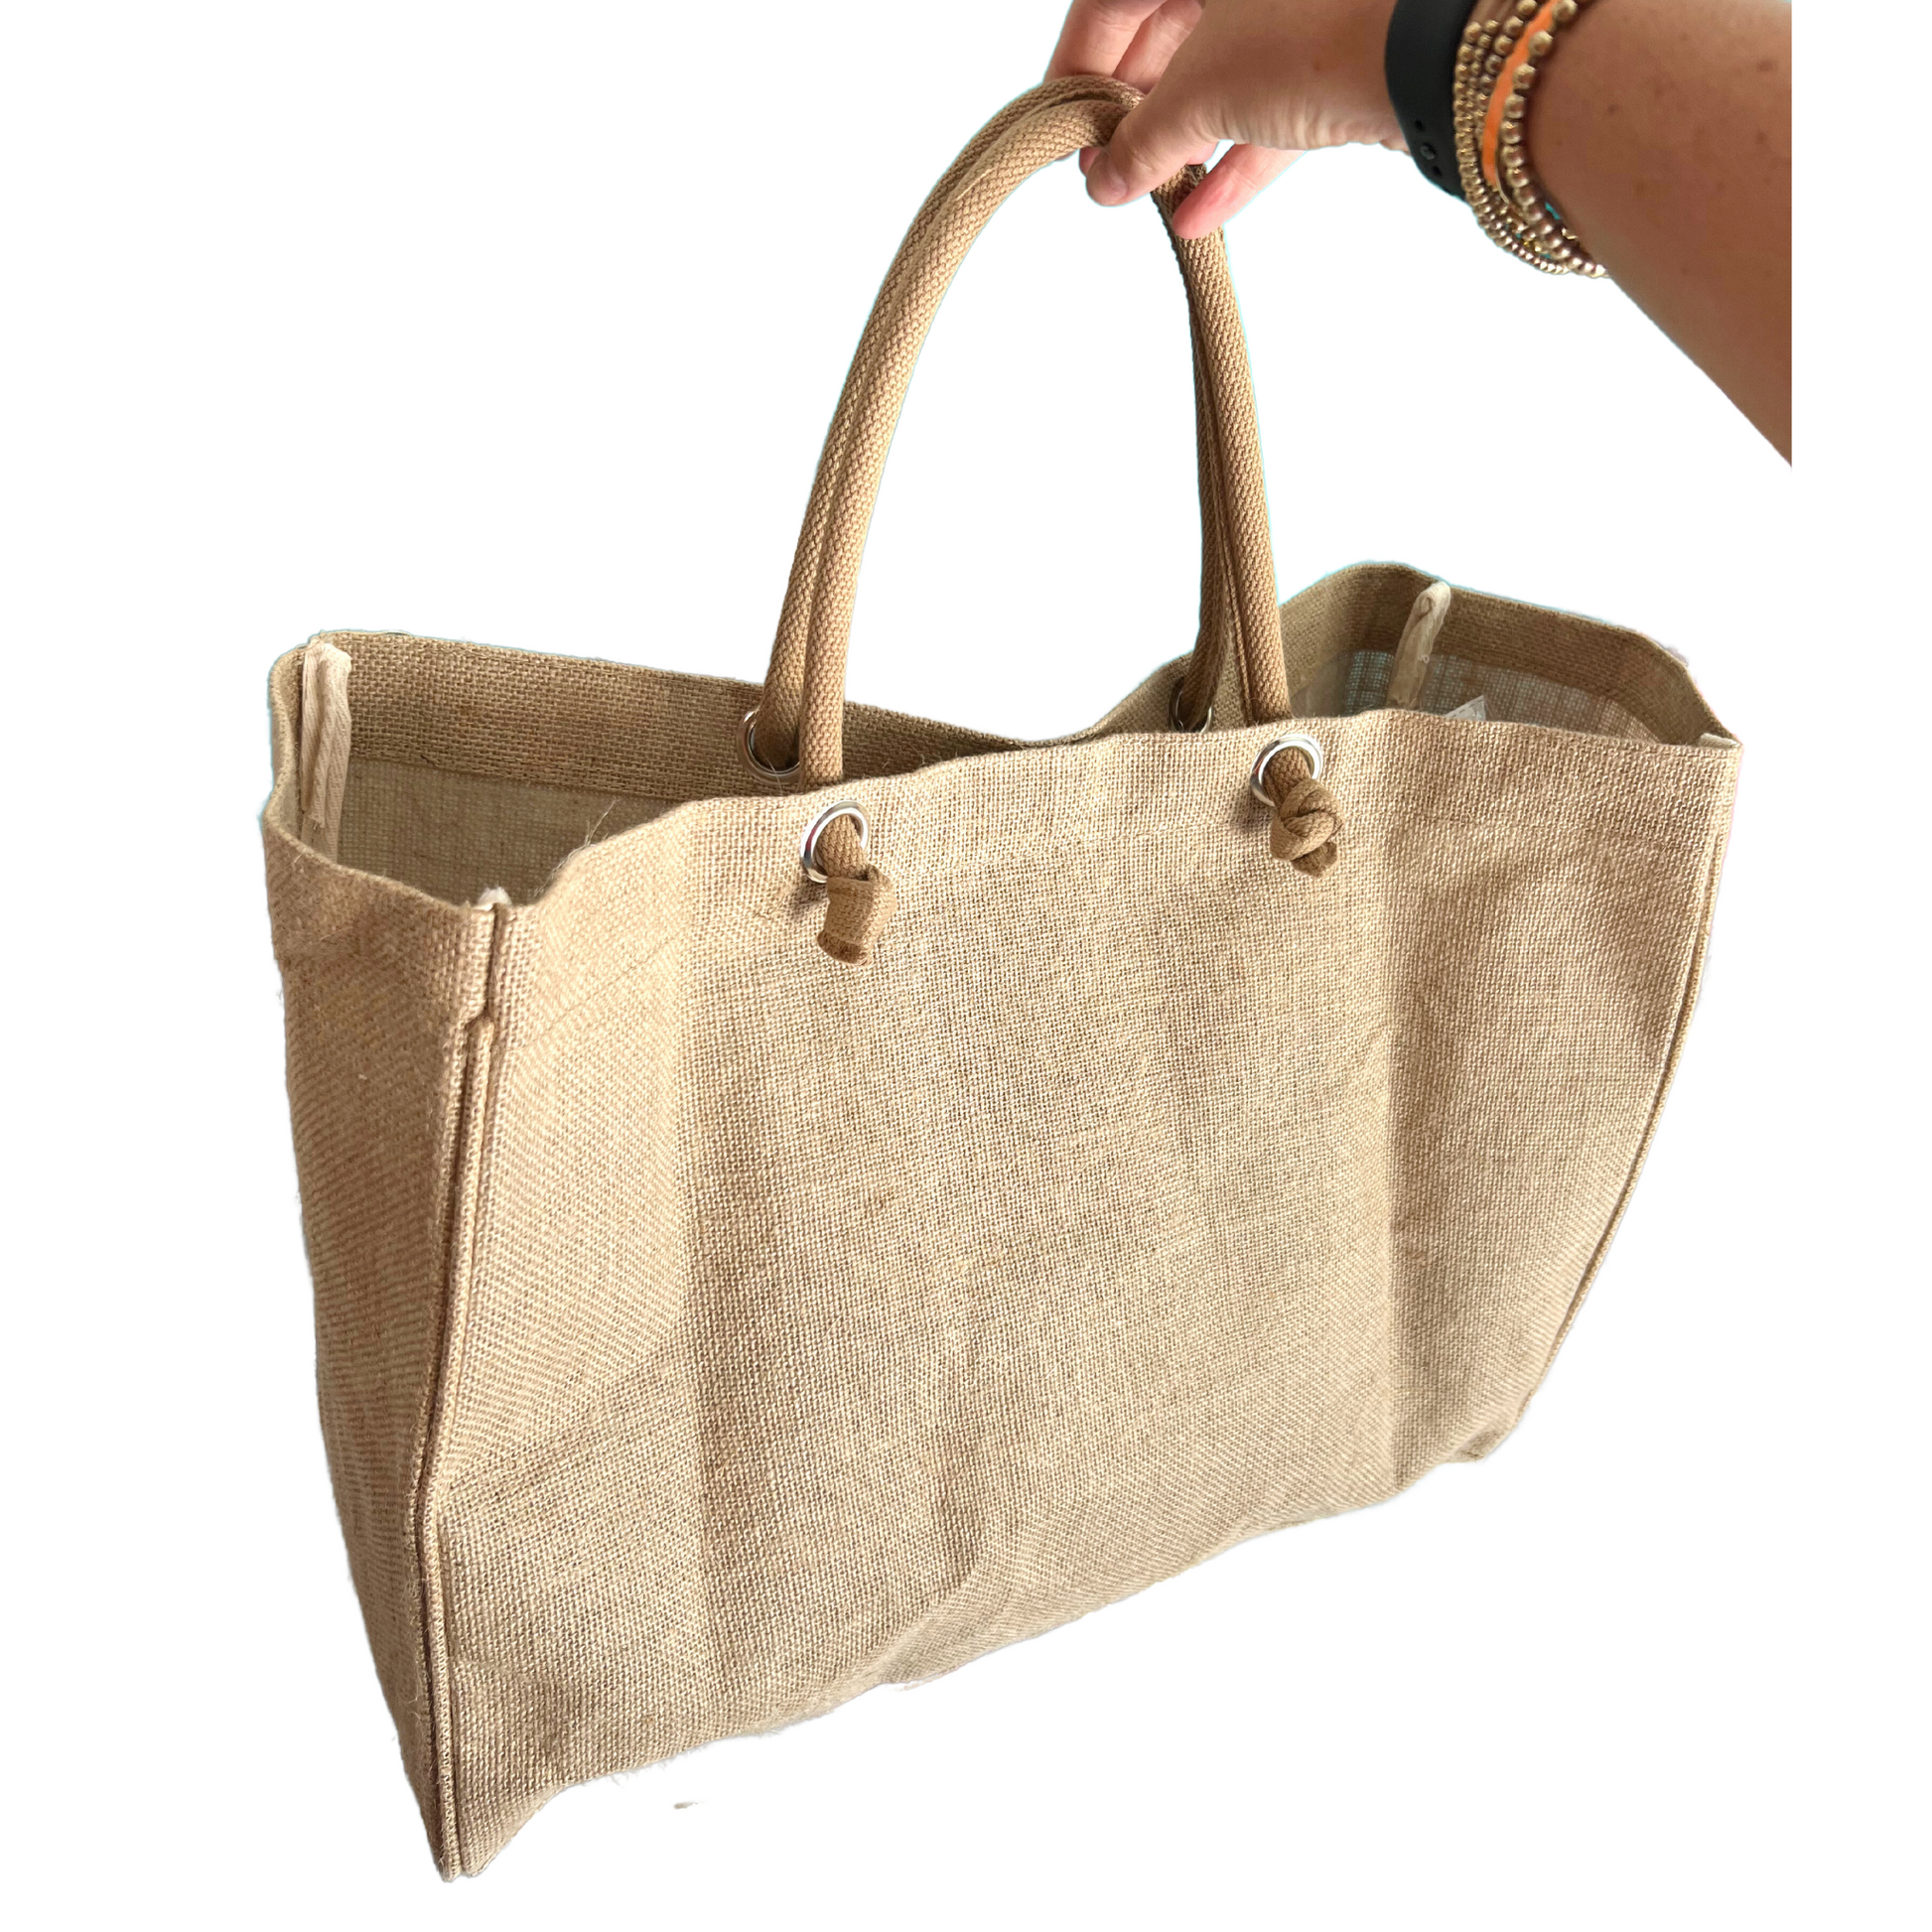 This stylish and practical burlap tote is perfect for any occasion. Its simple design and durable material make it an excellent choice for everyday use. It's made of premium burlap for enhanced strength.